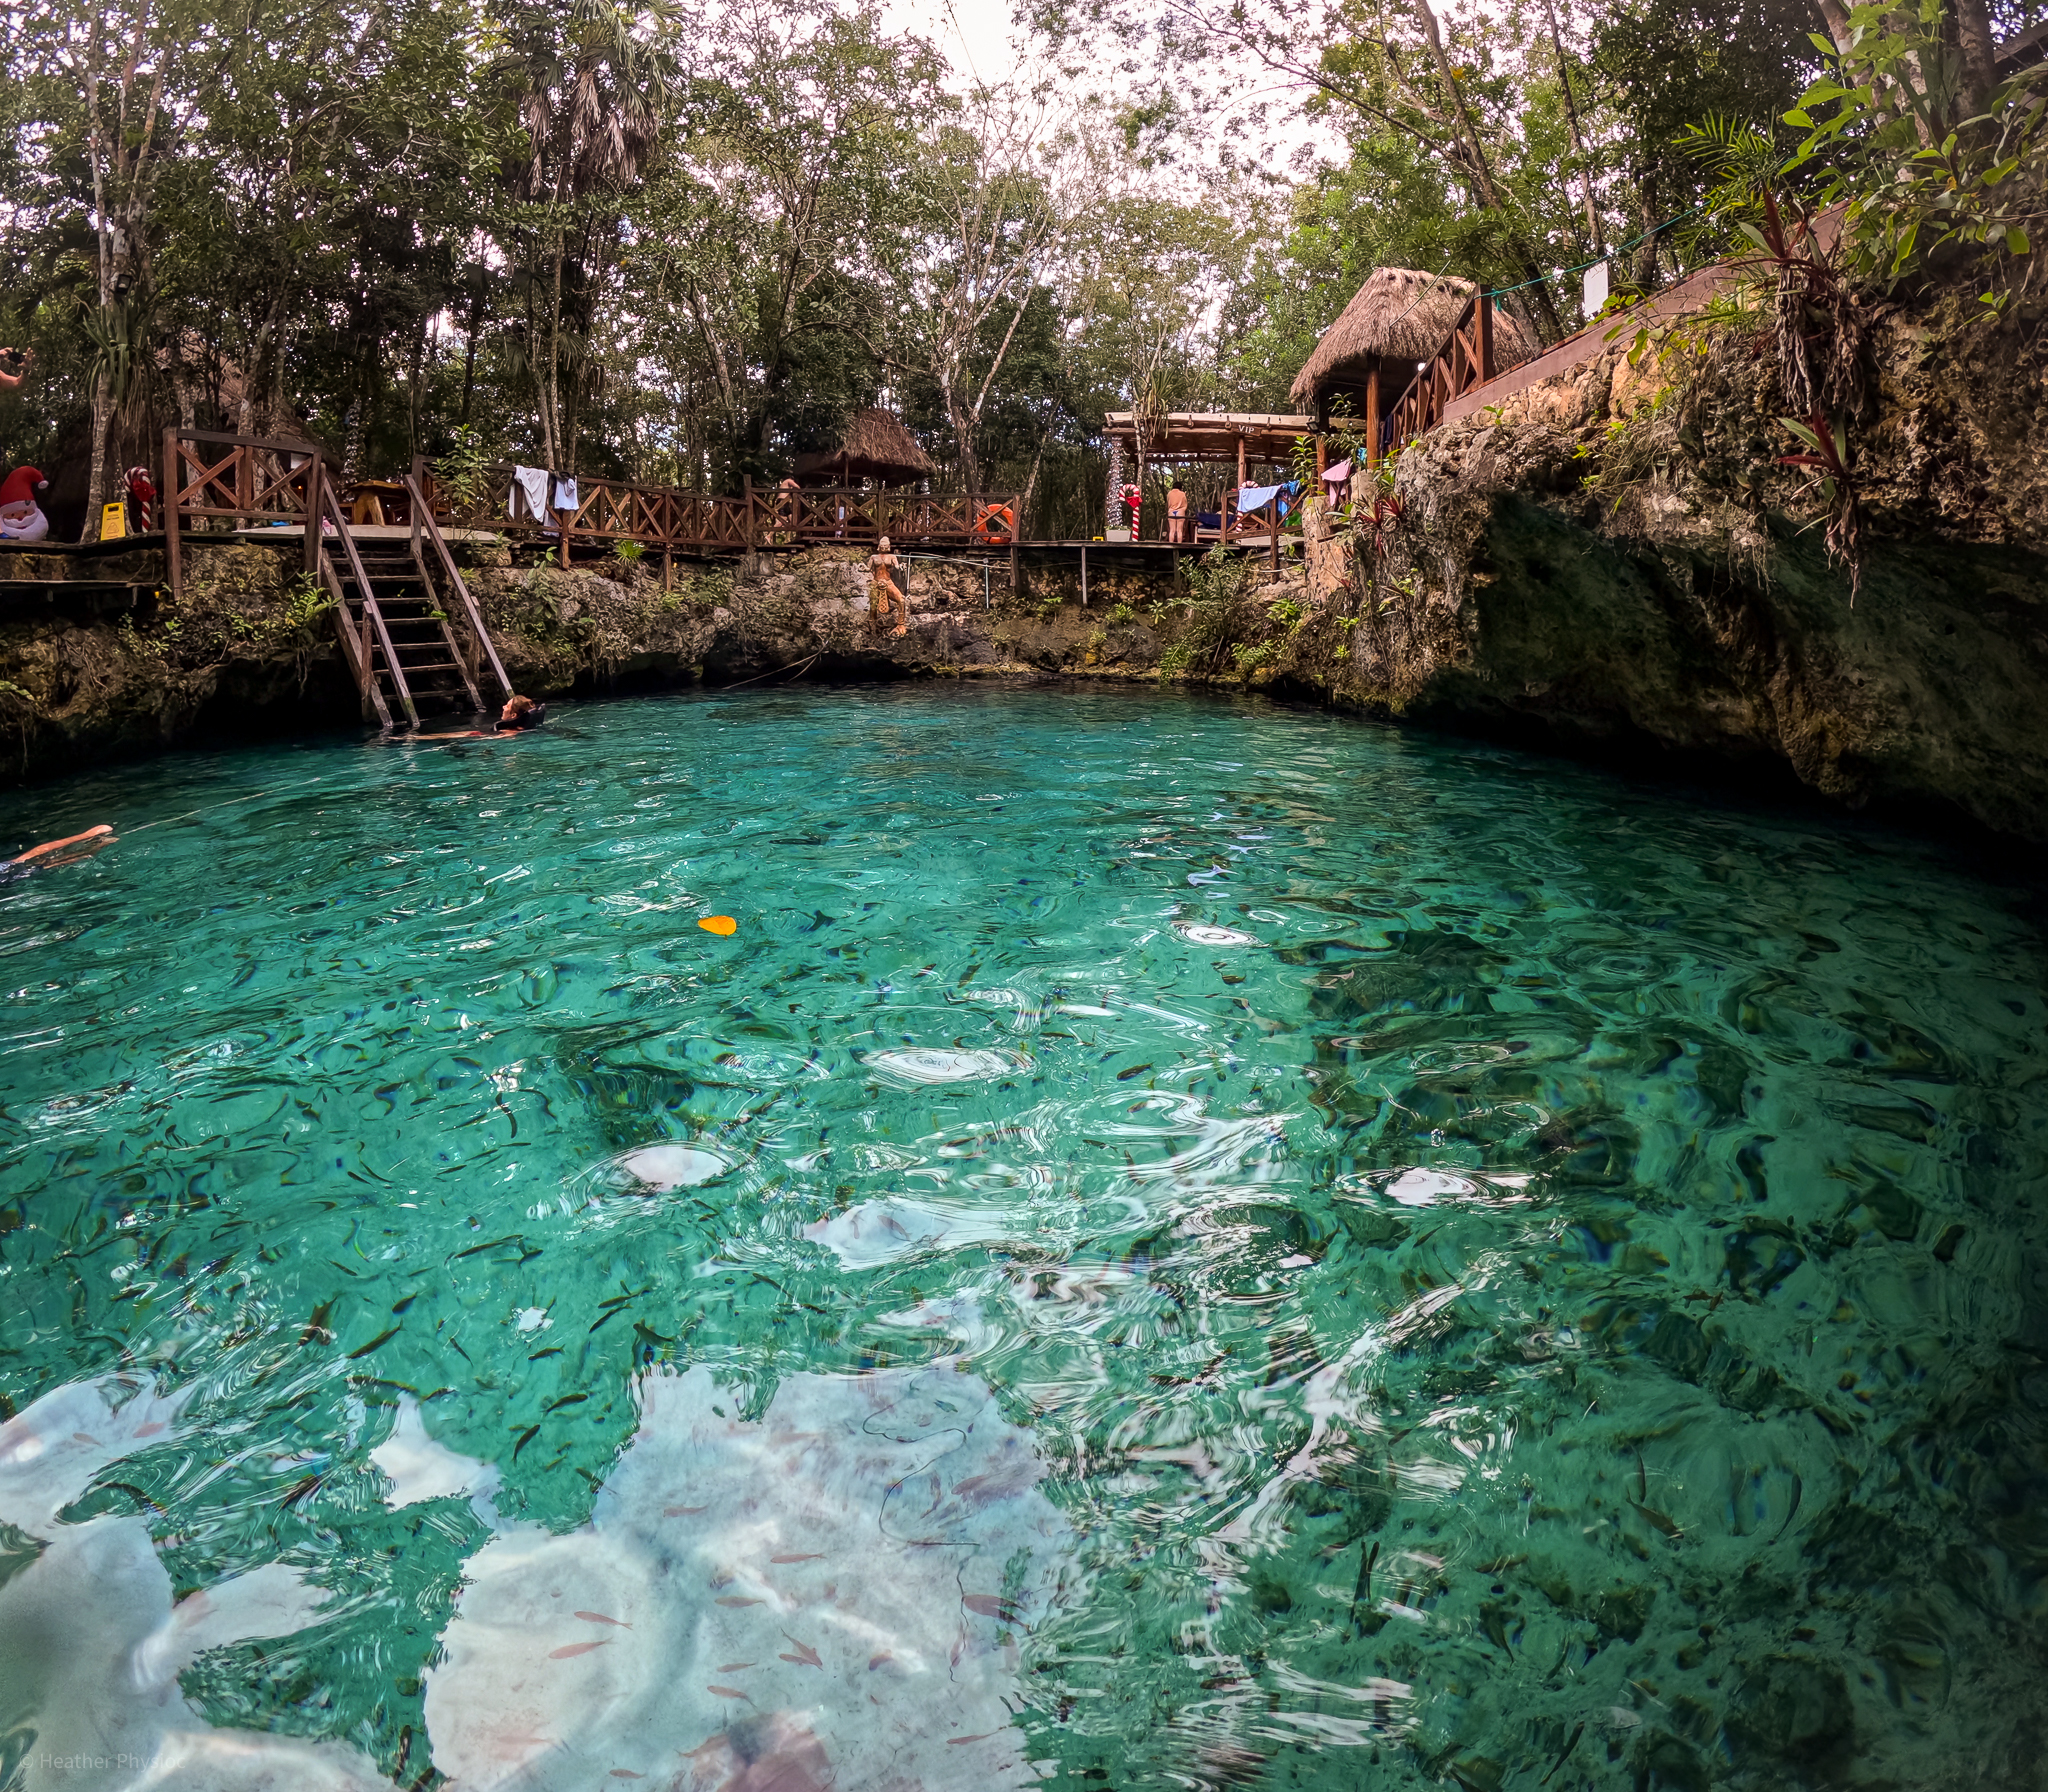 The crystalline waters of Cenote Zacil-Ha near Tulum, Mexico, surrounded by lush vegetation and a wooden deck with visitors enjoying the serene natural swimming hole.
